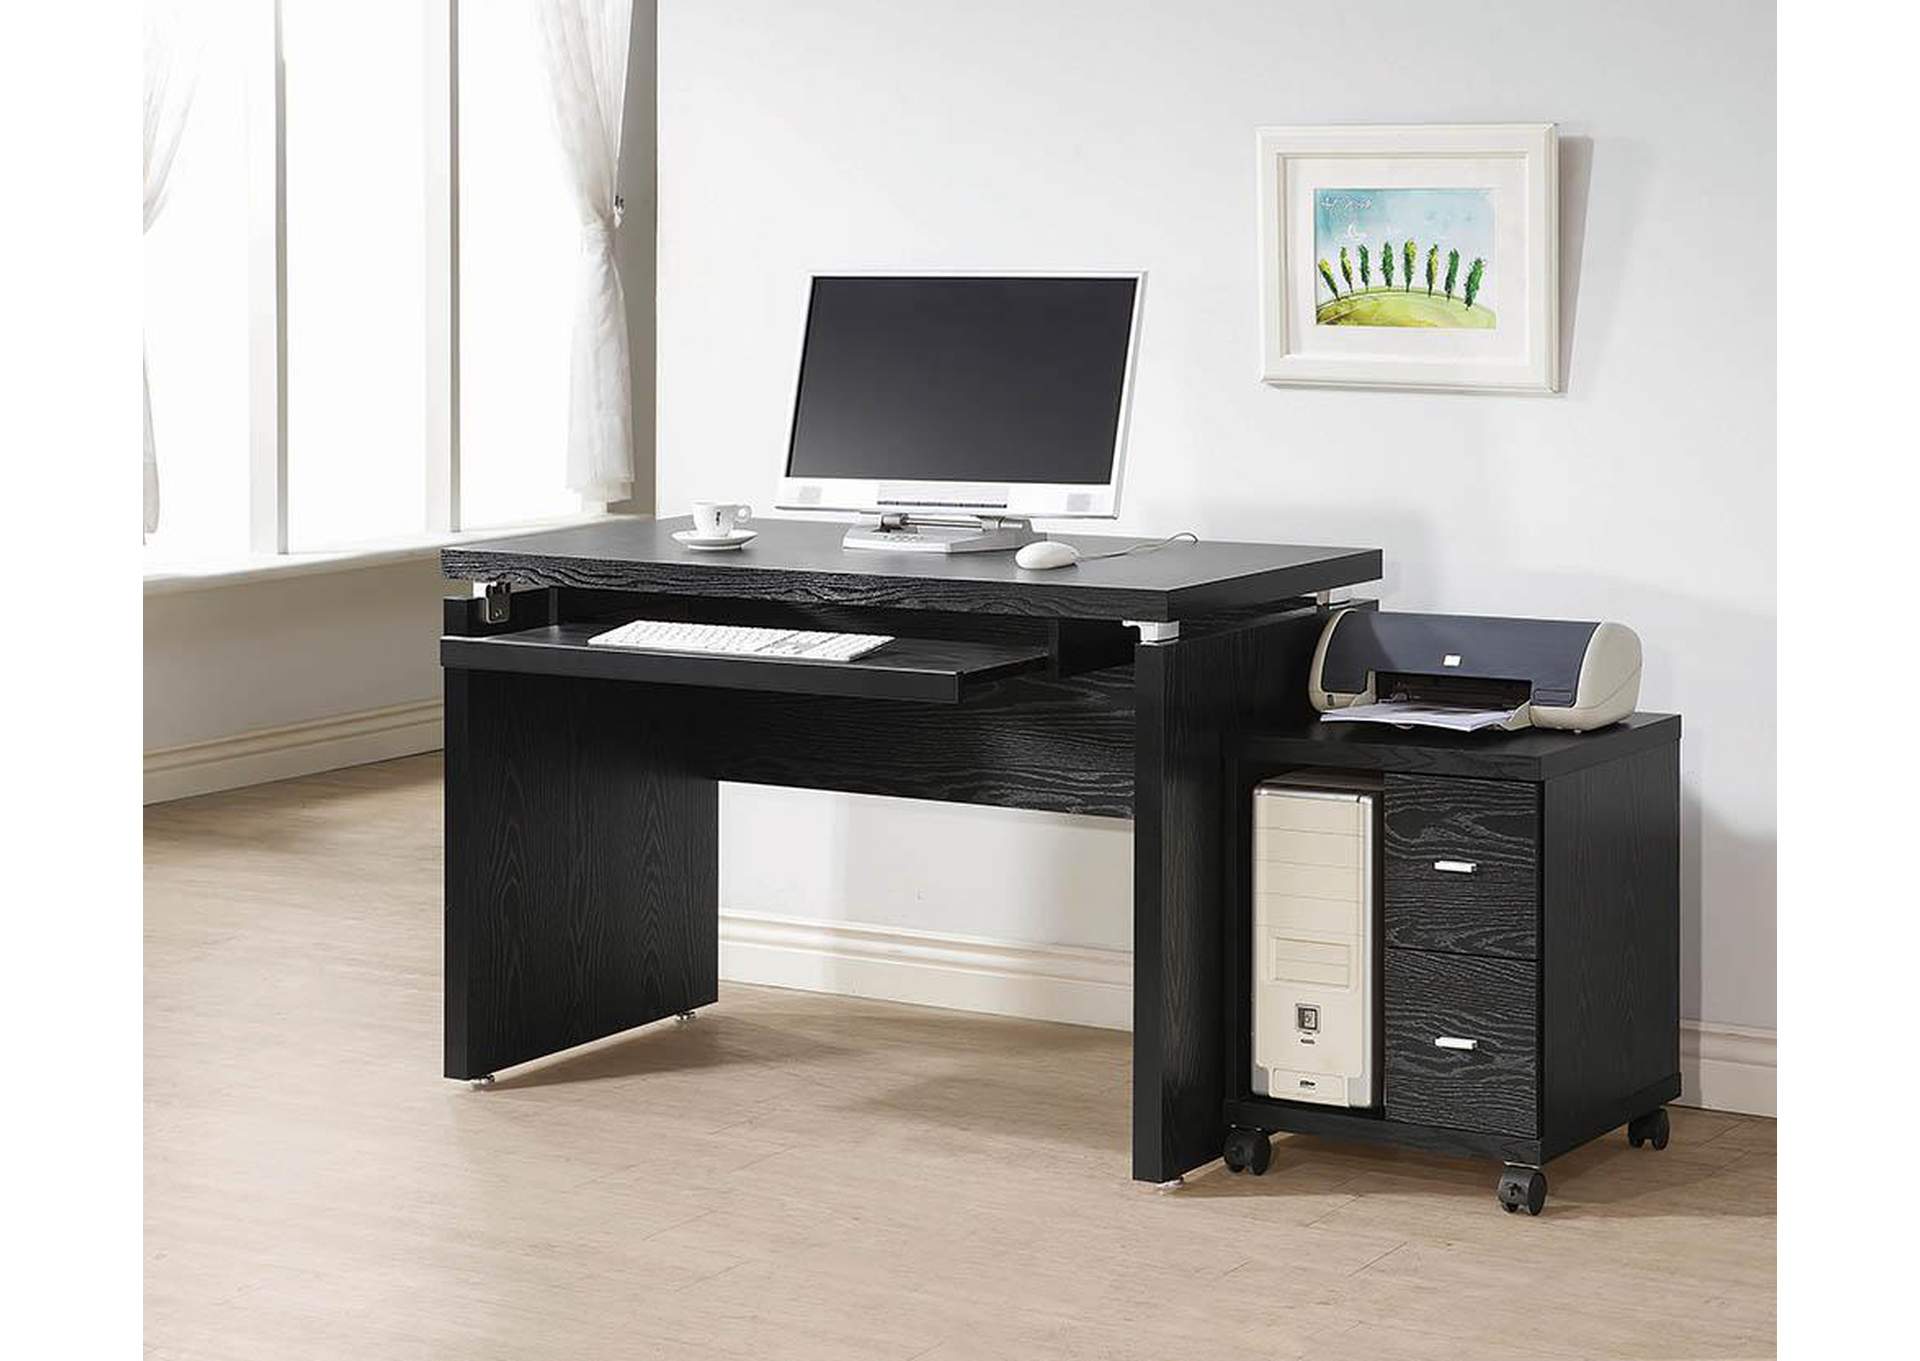 2 Drawer Computer Stand,ABF Coaster Furniture